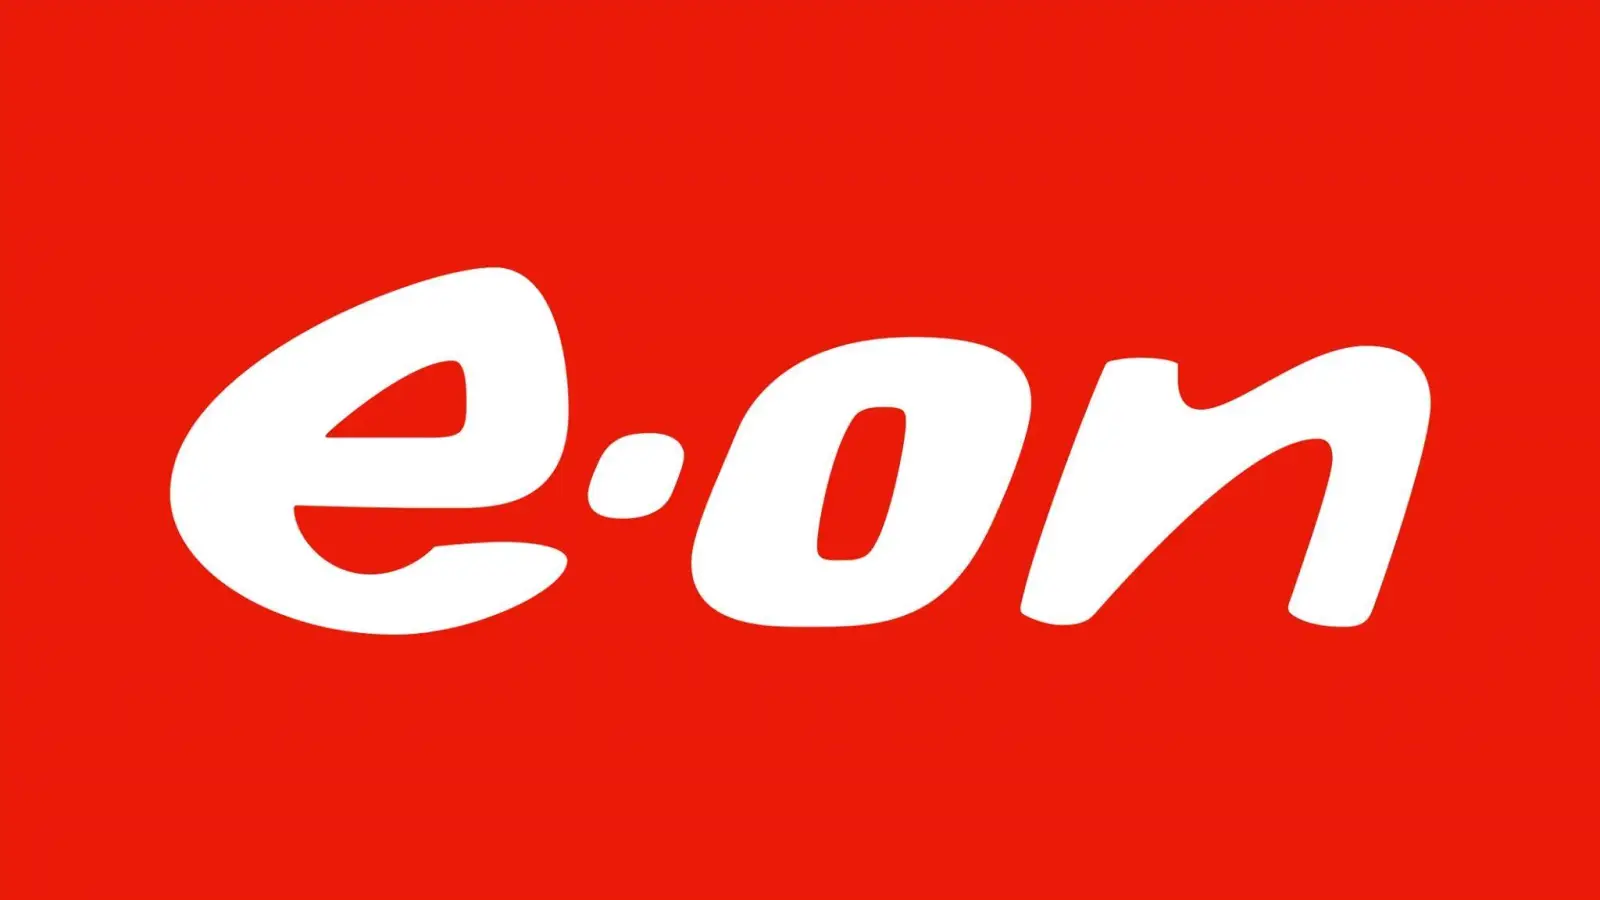 E.ON IMPORTANT Information All Customers All Romania